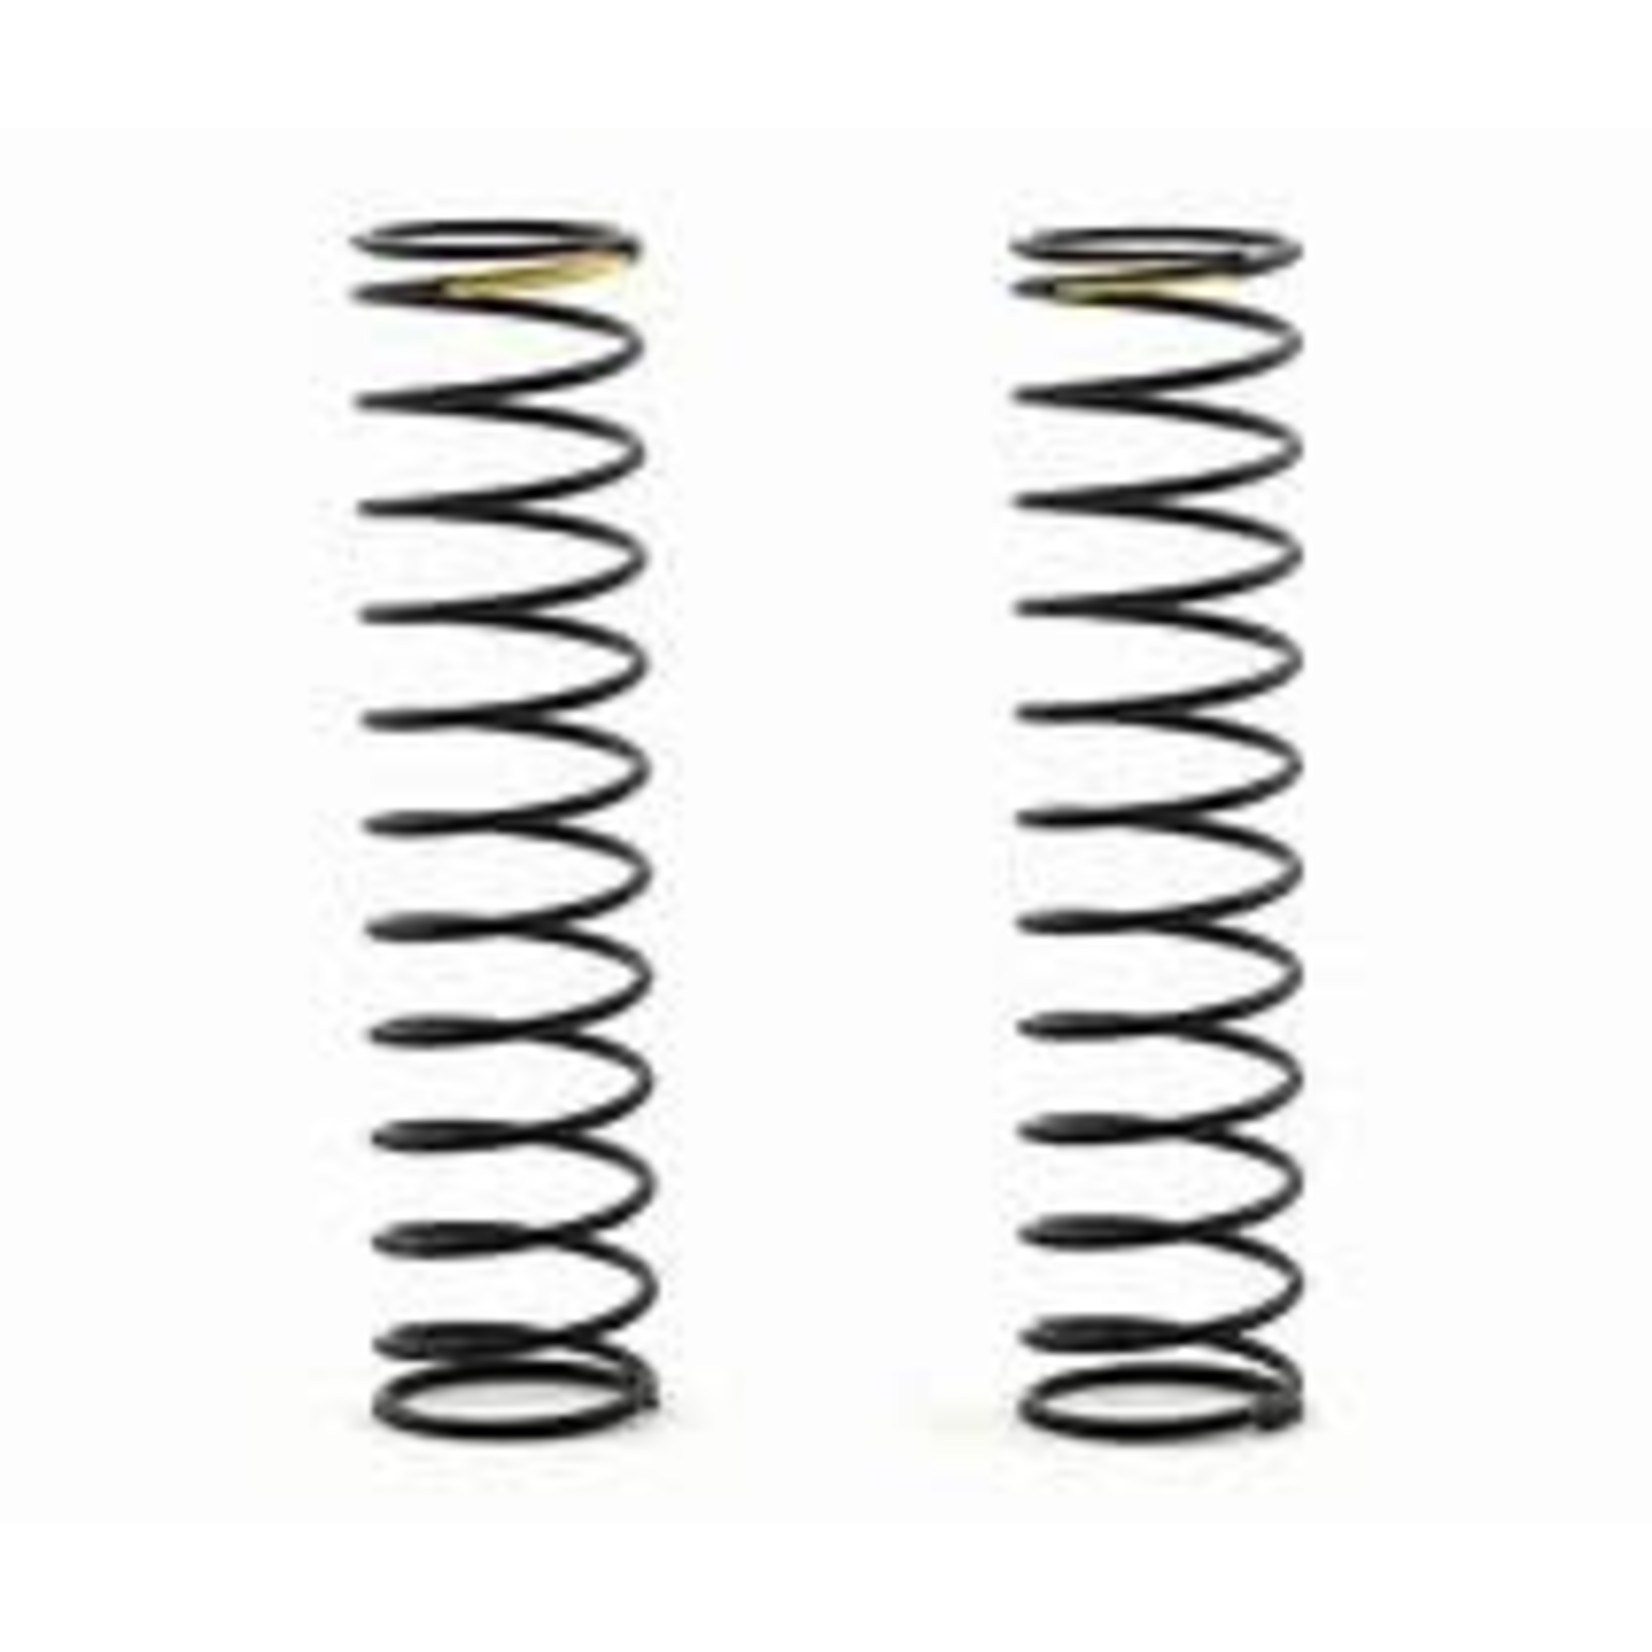 Element RC 63mm Shock Spring (Yellow - 2.47 lb/in) (2)